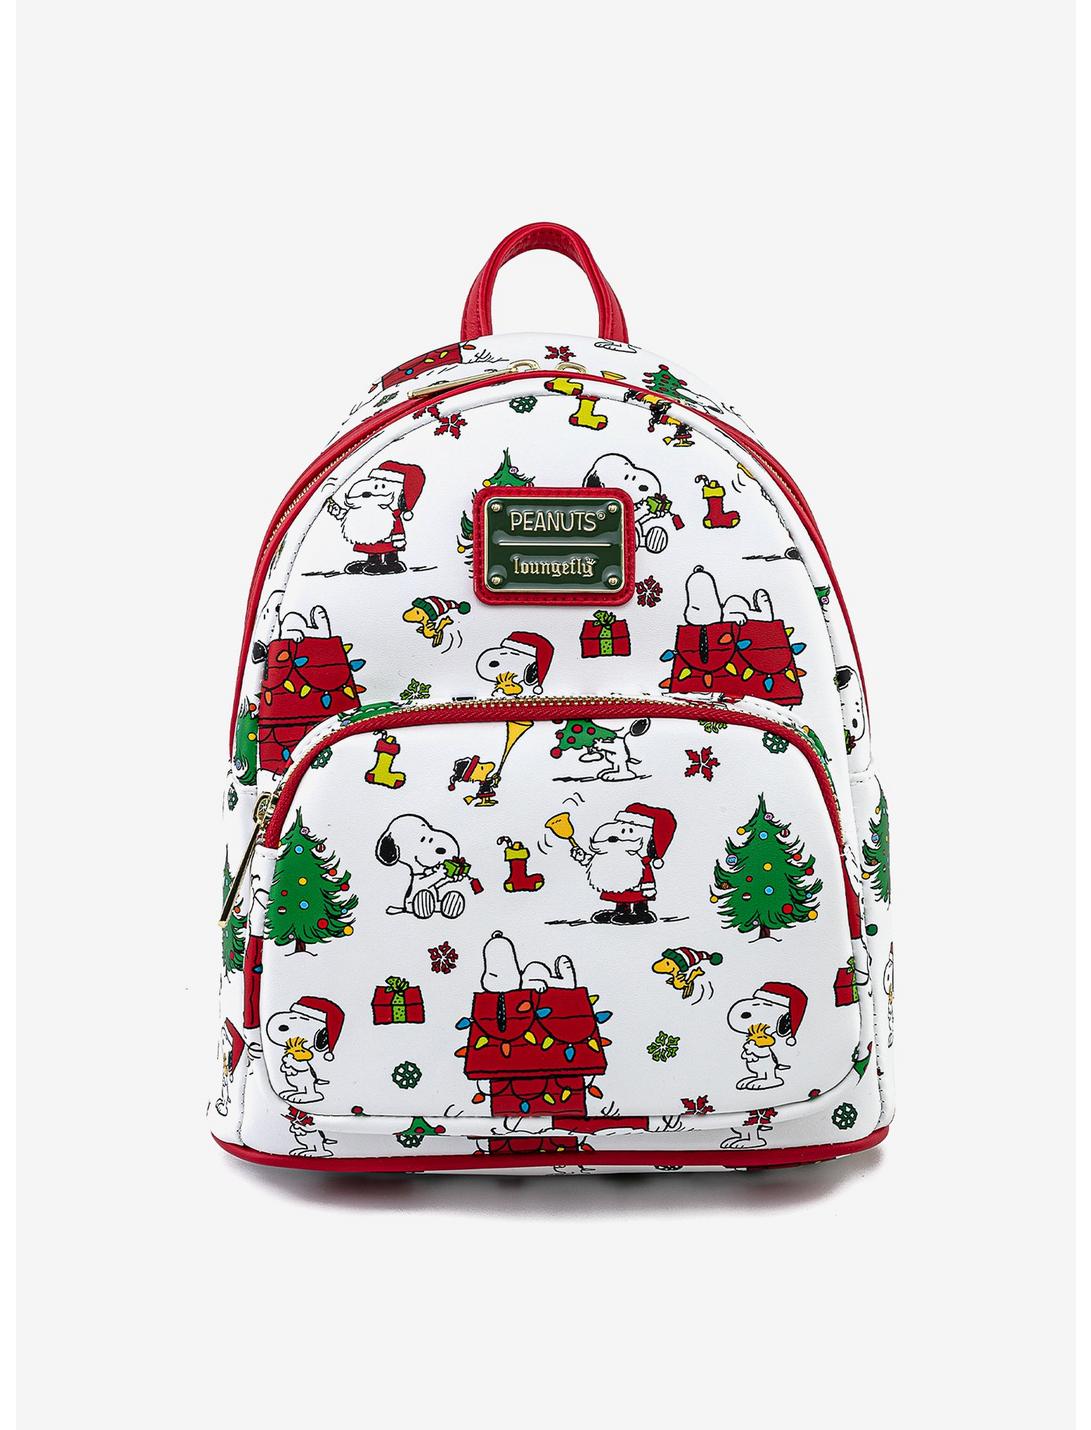 Loungefly Peanuts Snoopy & Woodstock Holiday Mini Backpack, , hi-res